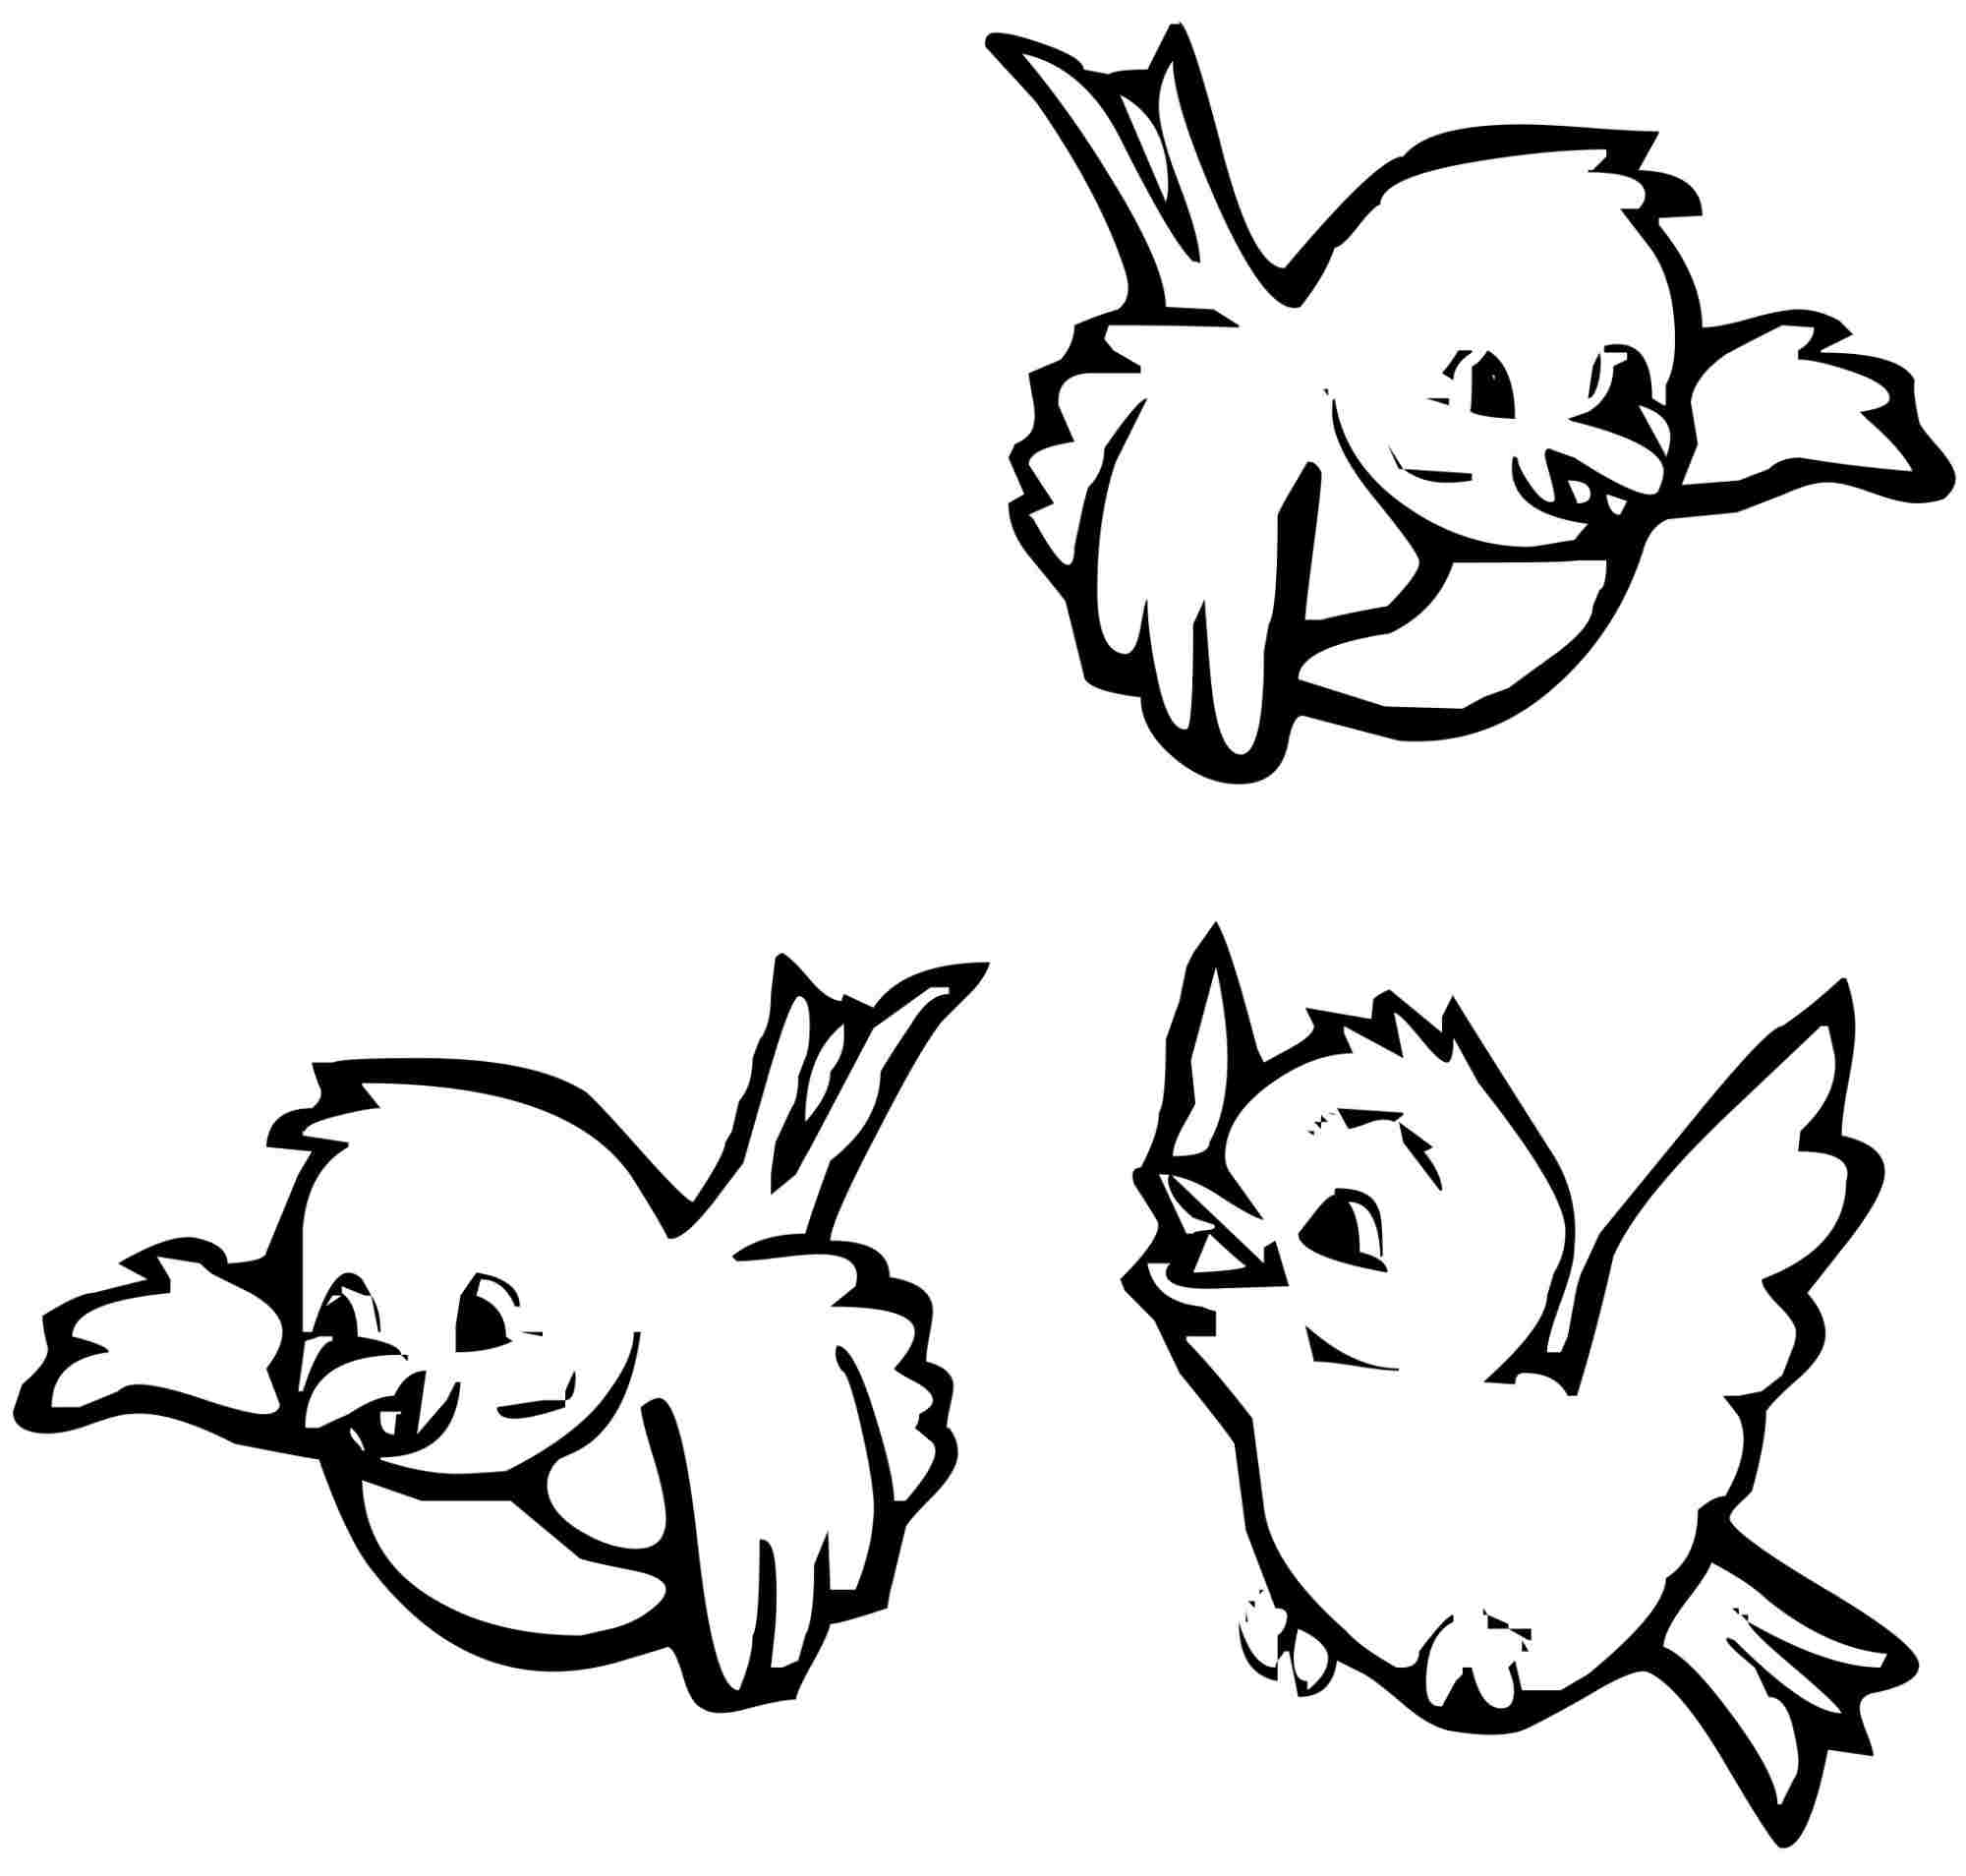 5 Best Images of Printable Bird Coloring Pages - Free Printable Adult